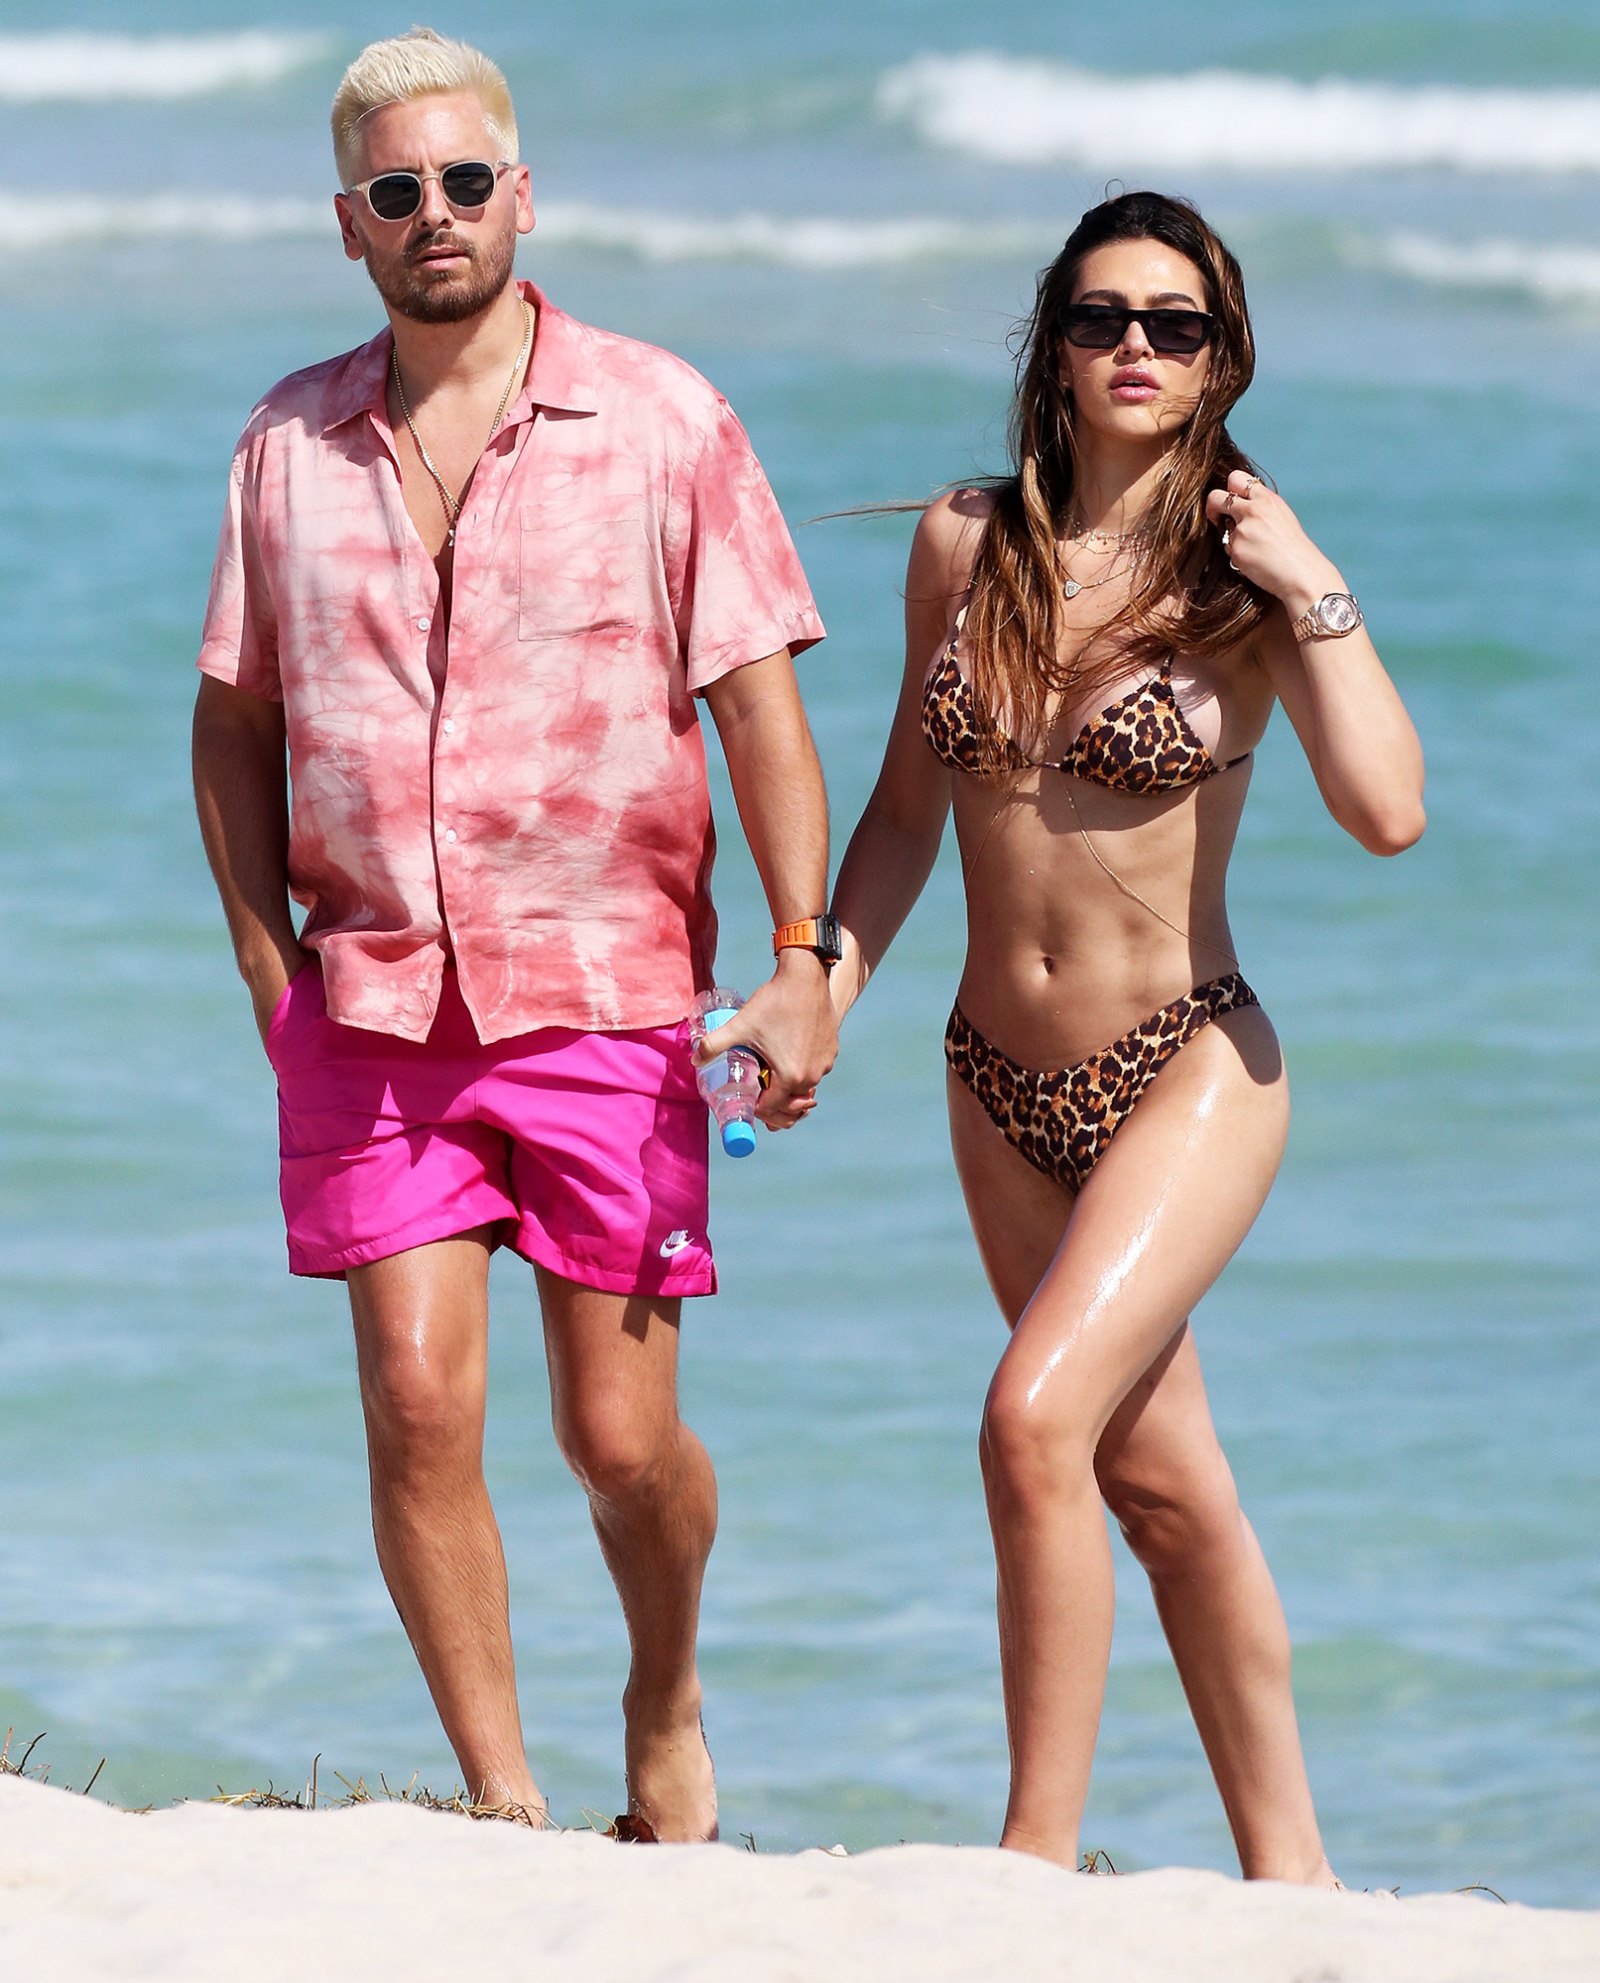 Scott Disick Offers Explanation for Why He Dates Younger Girls